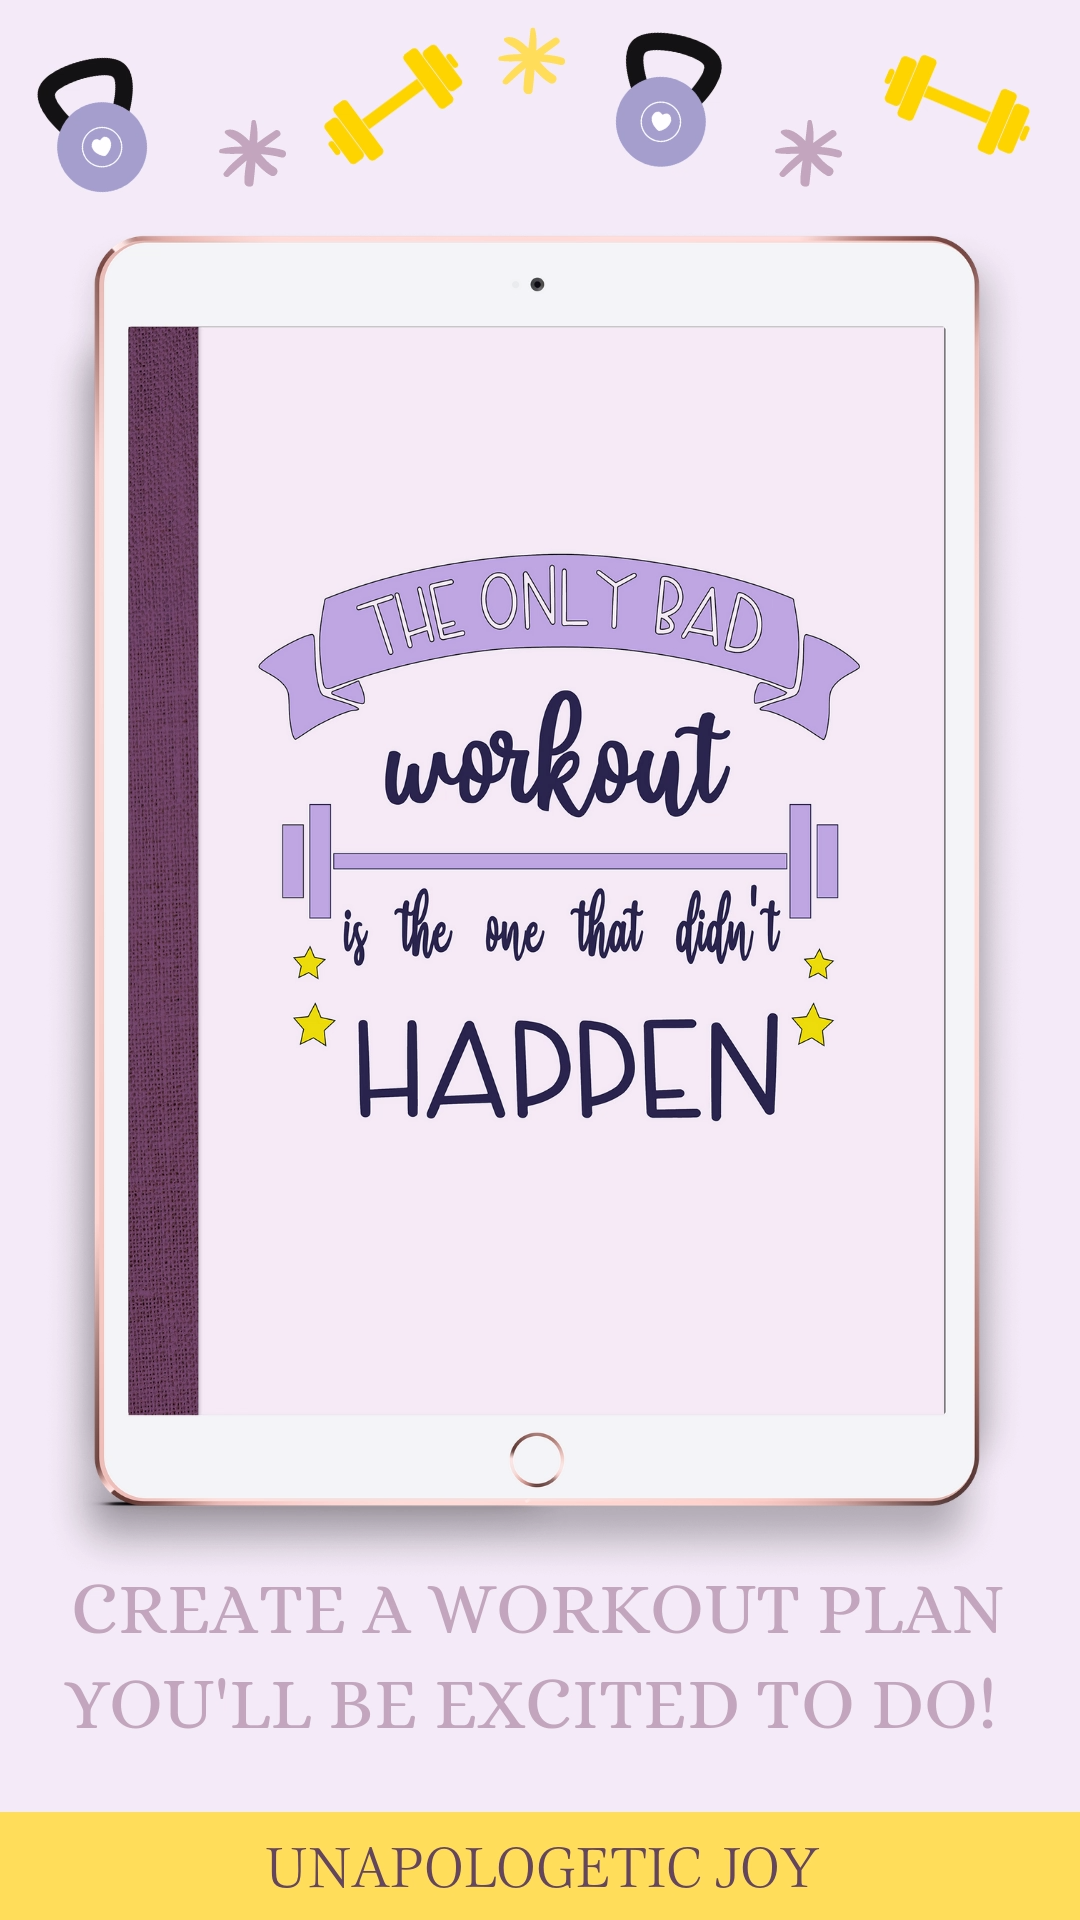 No Bad Workout Digital Fitness Planner - No Bad Workout Digital Fitness Planner -   16 best fitness Journal ideas